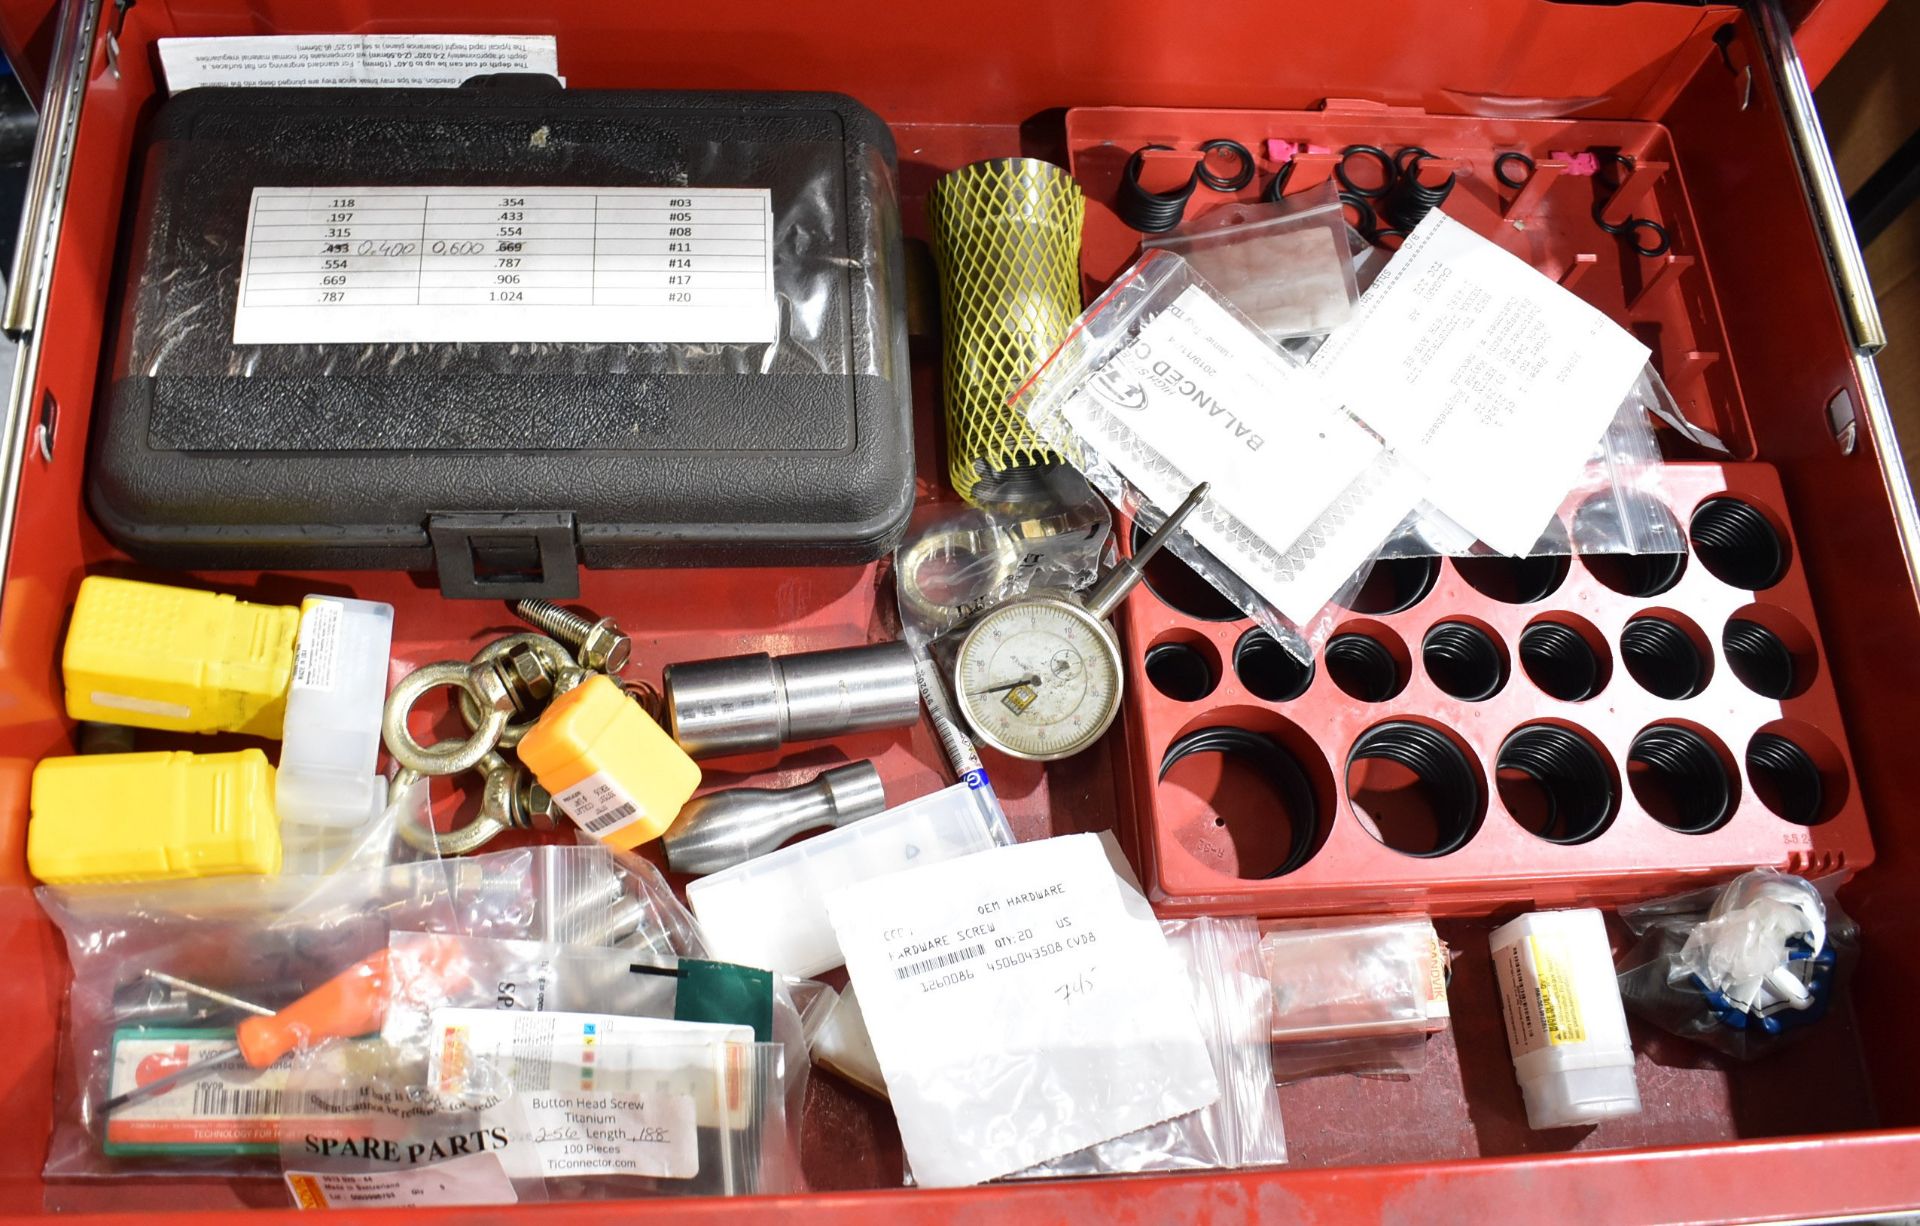 LOT/ CONTENTS OF ROLLING TOOL CABINET CONSISTING OF COLLETS, HEAT SHRINK TOOLING, PARALLELS, CARBIDE - Image 5 of 8